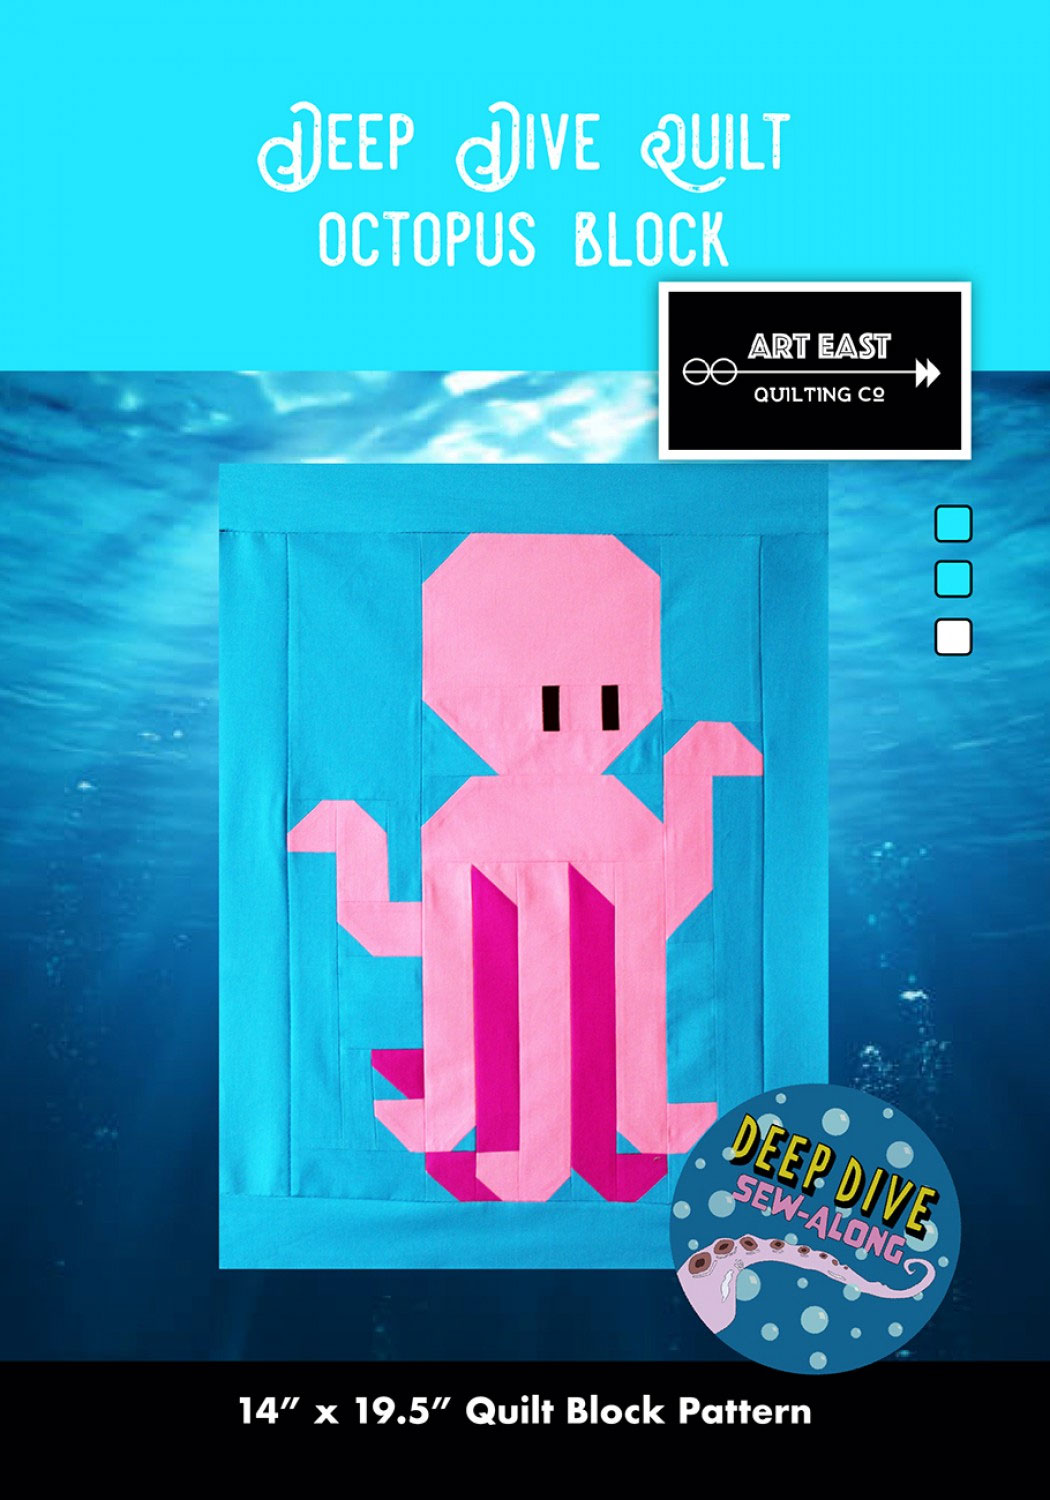 Octopus-Block-sewing-pattern-Art-East-Quilting-Co-front